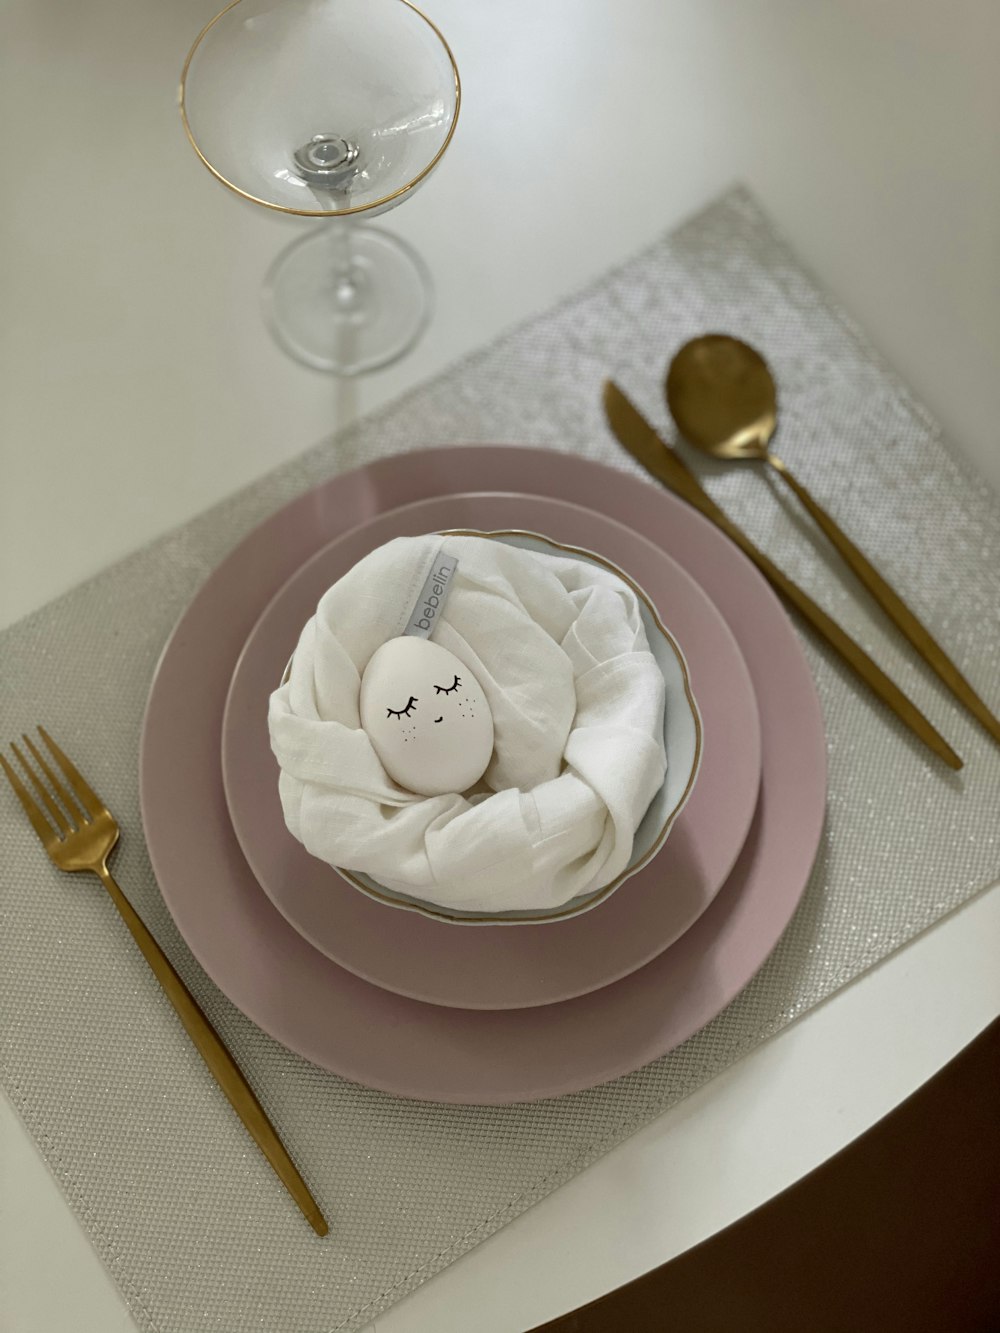 white egg on pink round plate beside fork and bread knife